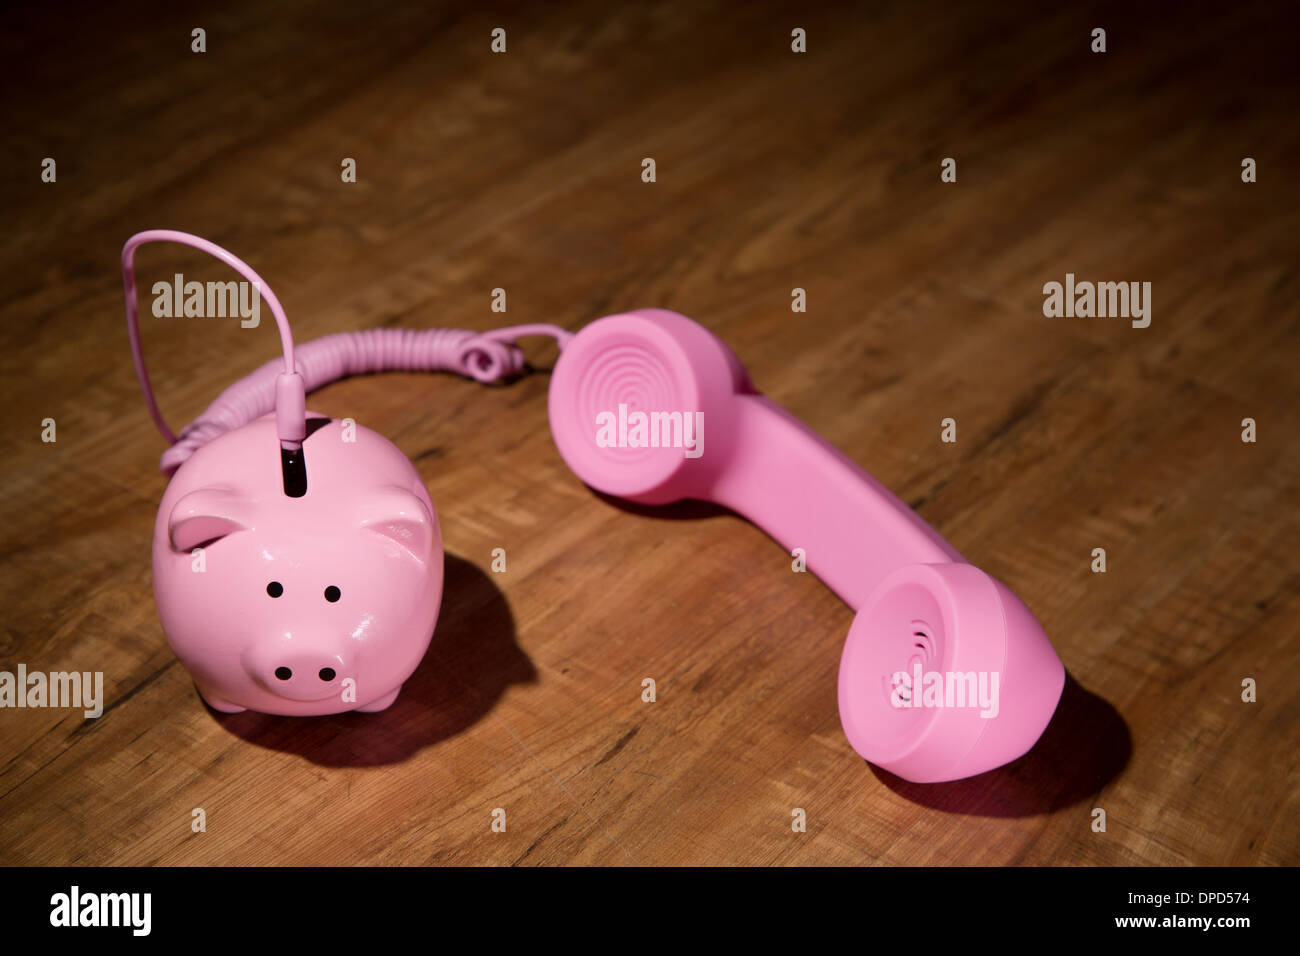 Call for help with savings - a piggy bank and a phone receiver Stock Photo